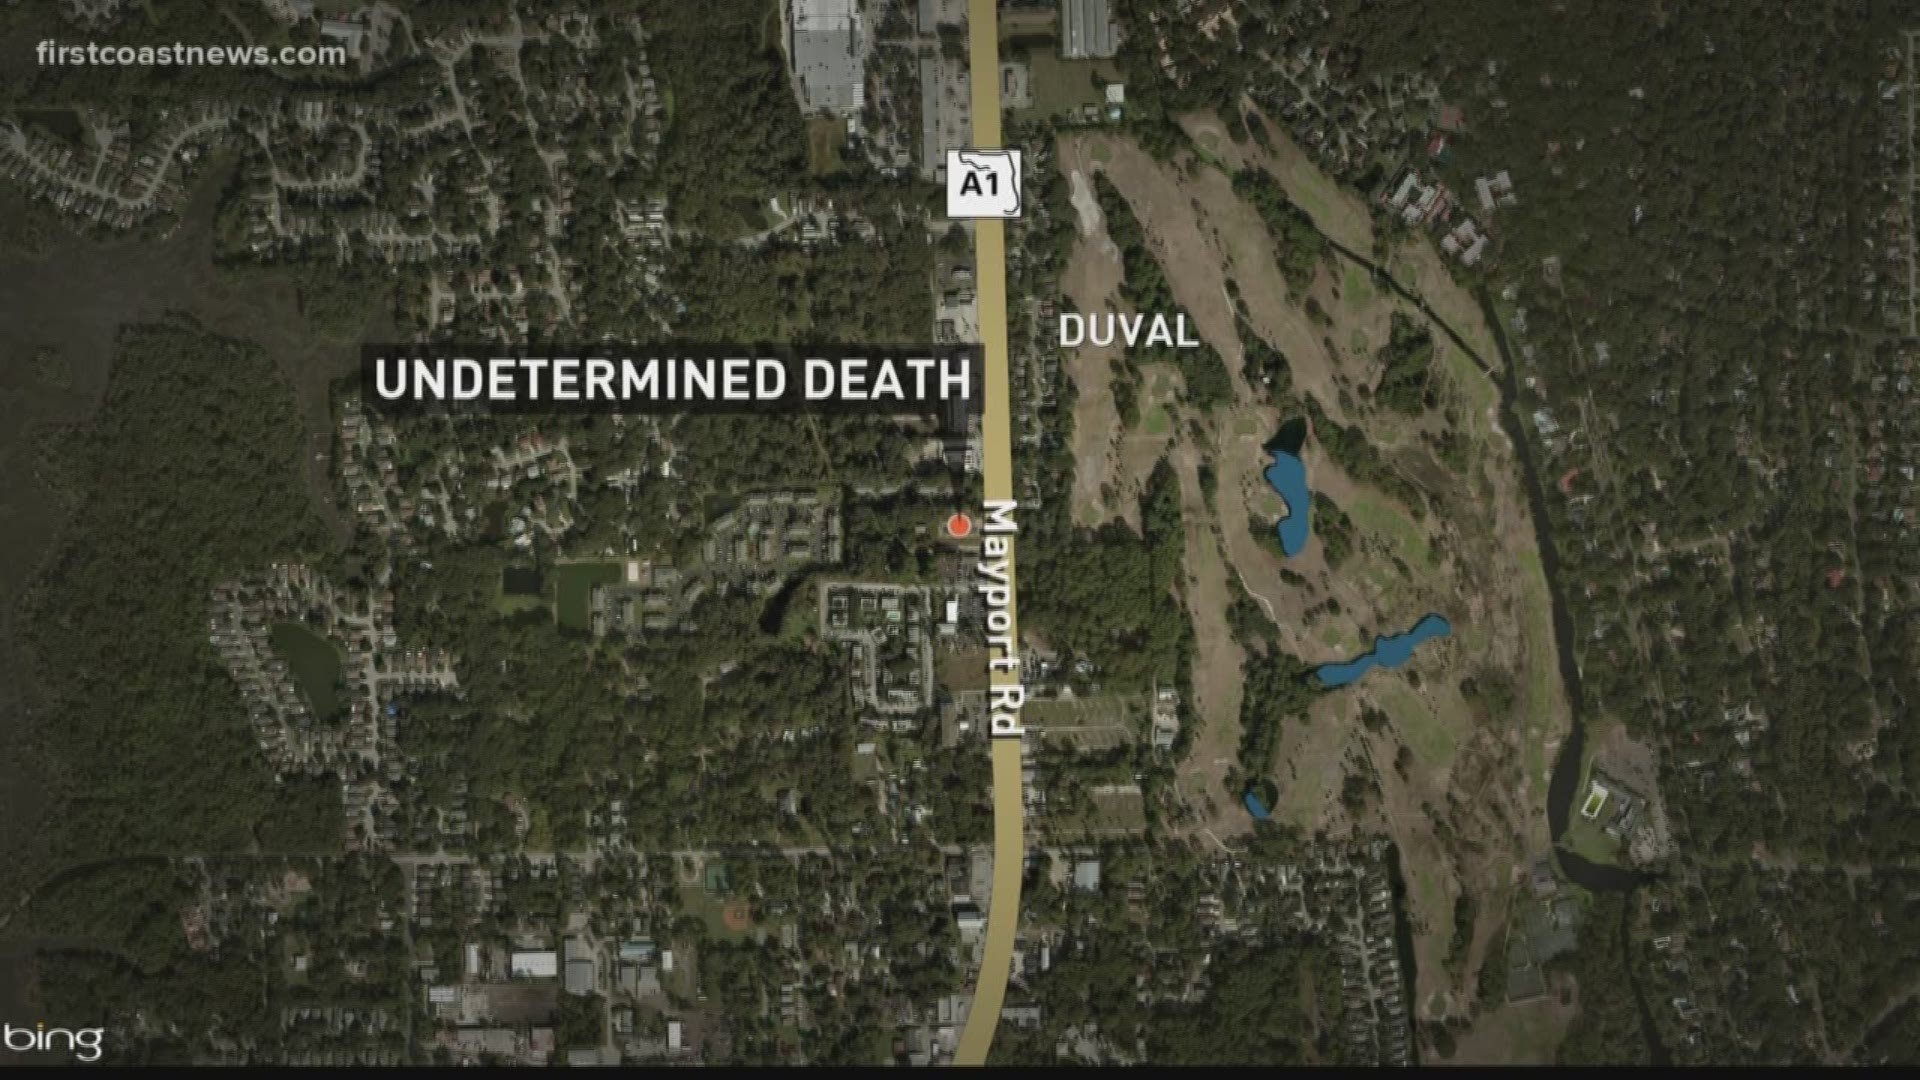 The medical examiner said no foul play is suspected after a man was found dead inside a home on Mayport Road in Atlantic Beach Friday.